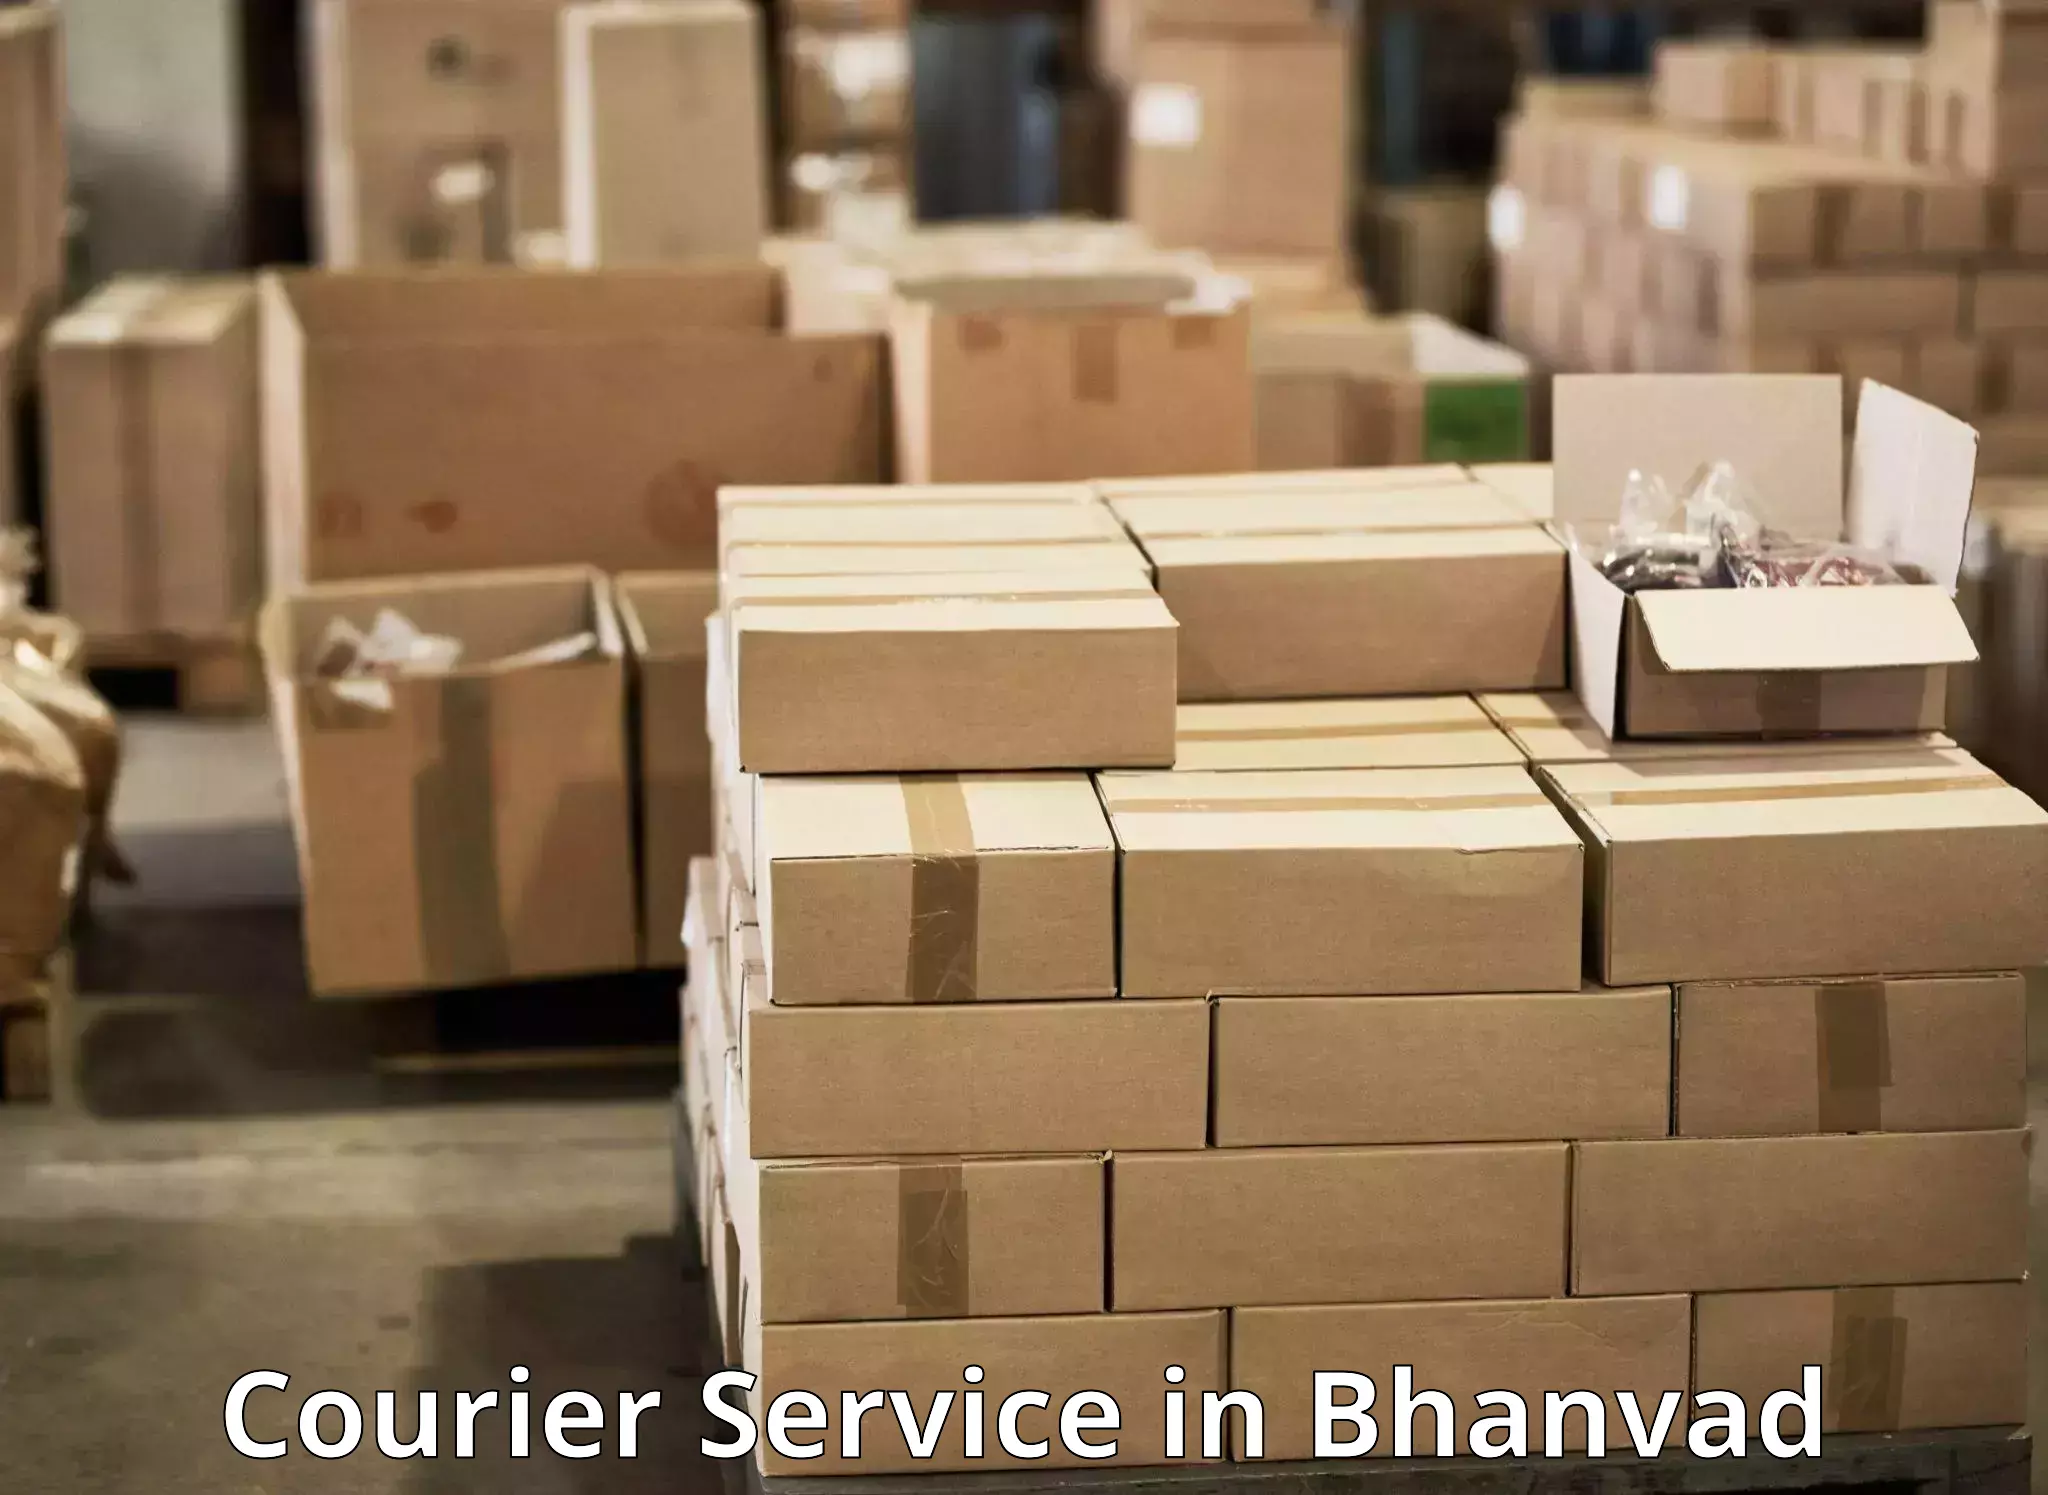 Reliable logistics providers in Bhanvad